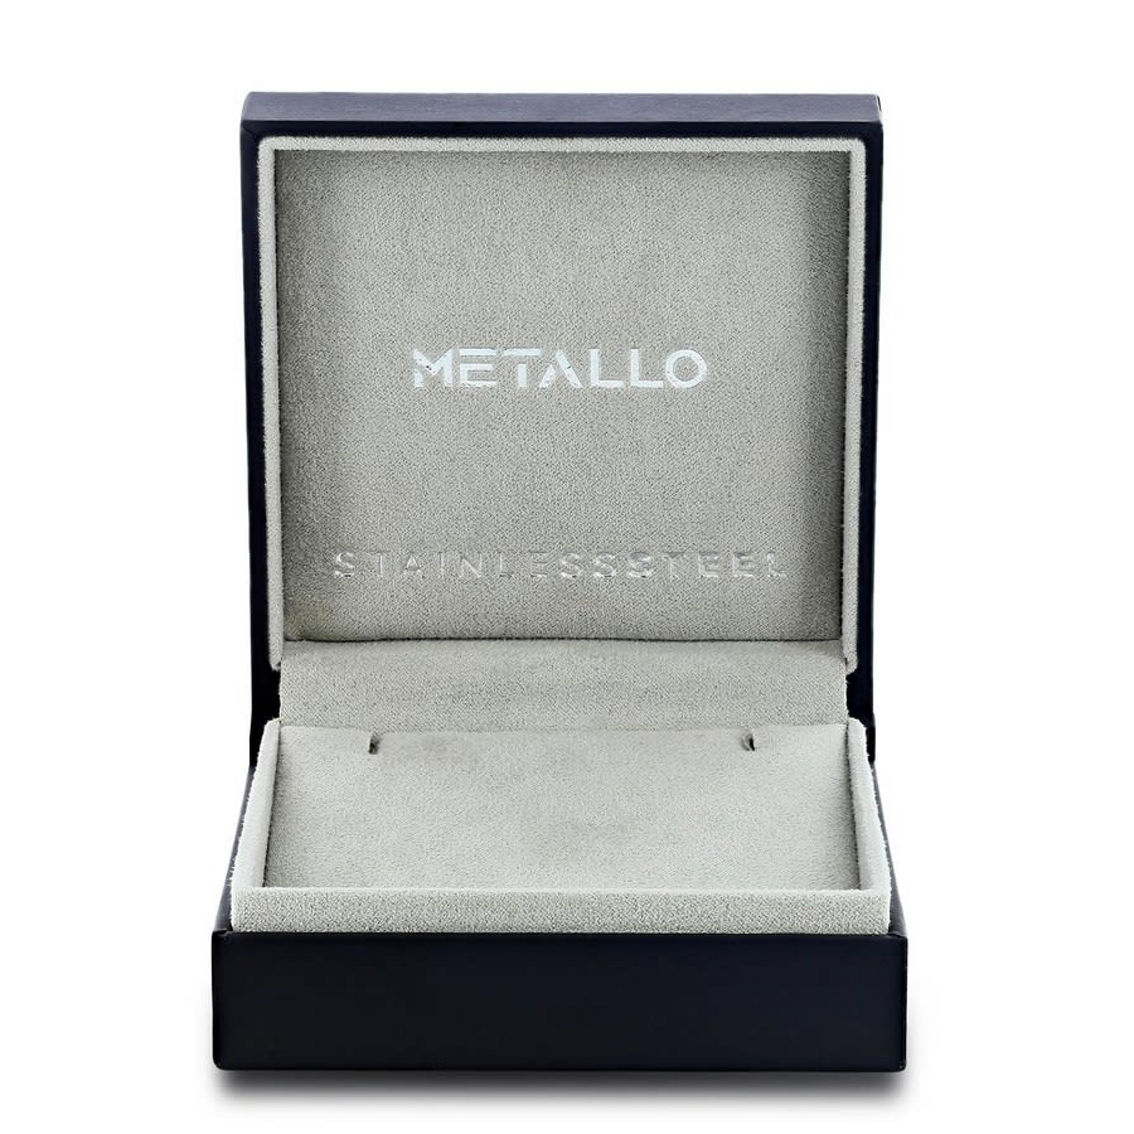 Metallo Stainless Steel Polished Cross Necklace - Blue Plated - Image 2 of 3